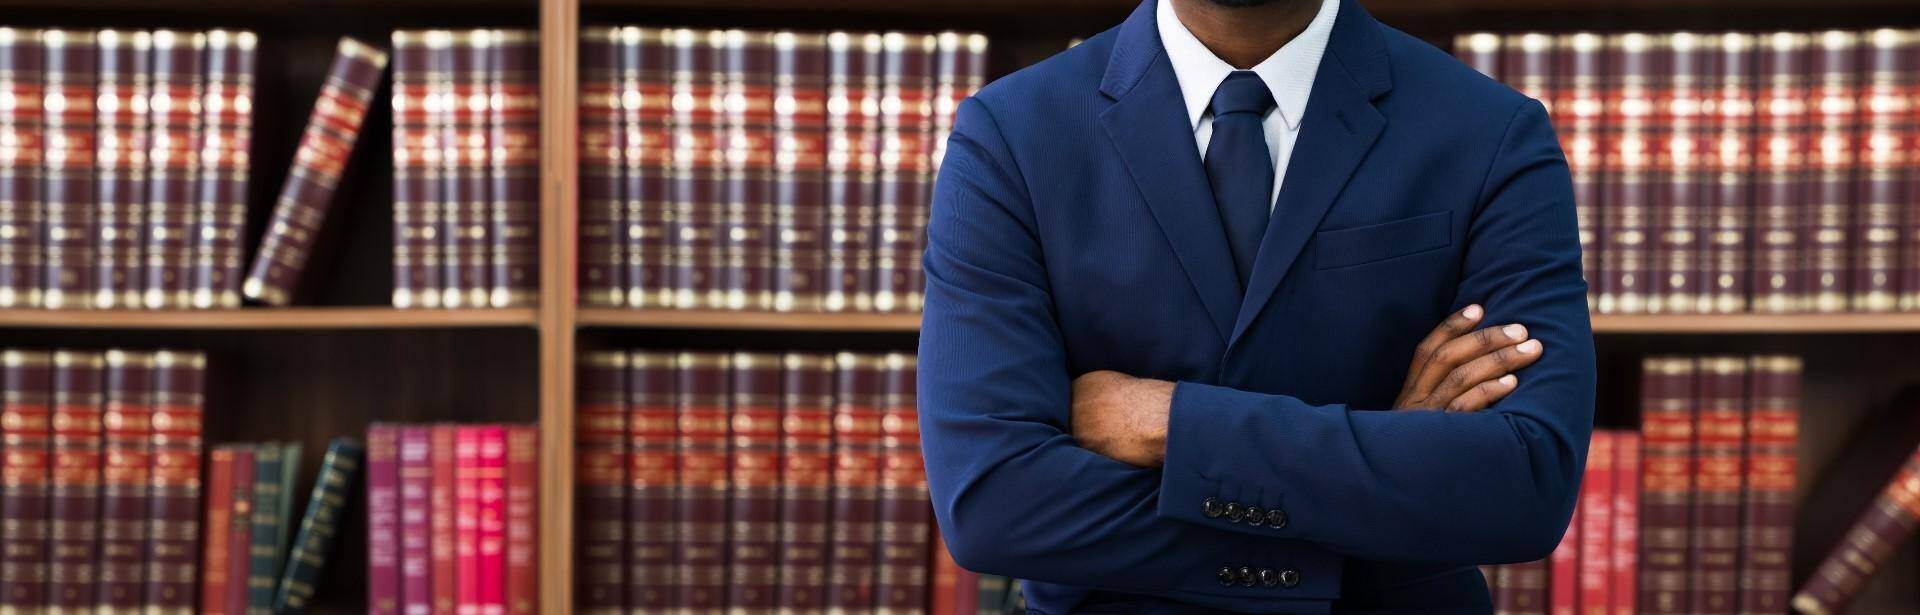 A black lawyer standing in front of a bookshelf of law book in Marietta, Georgia